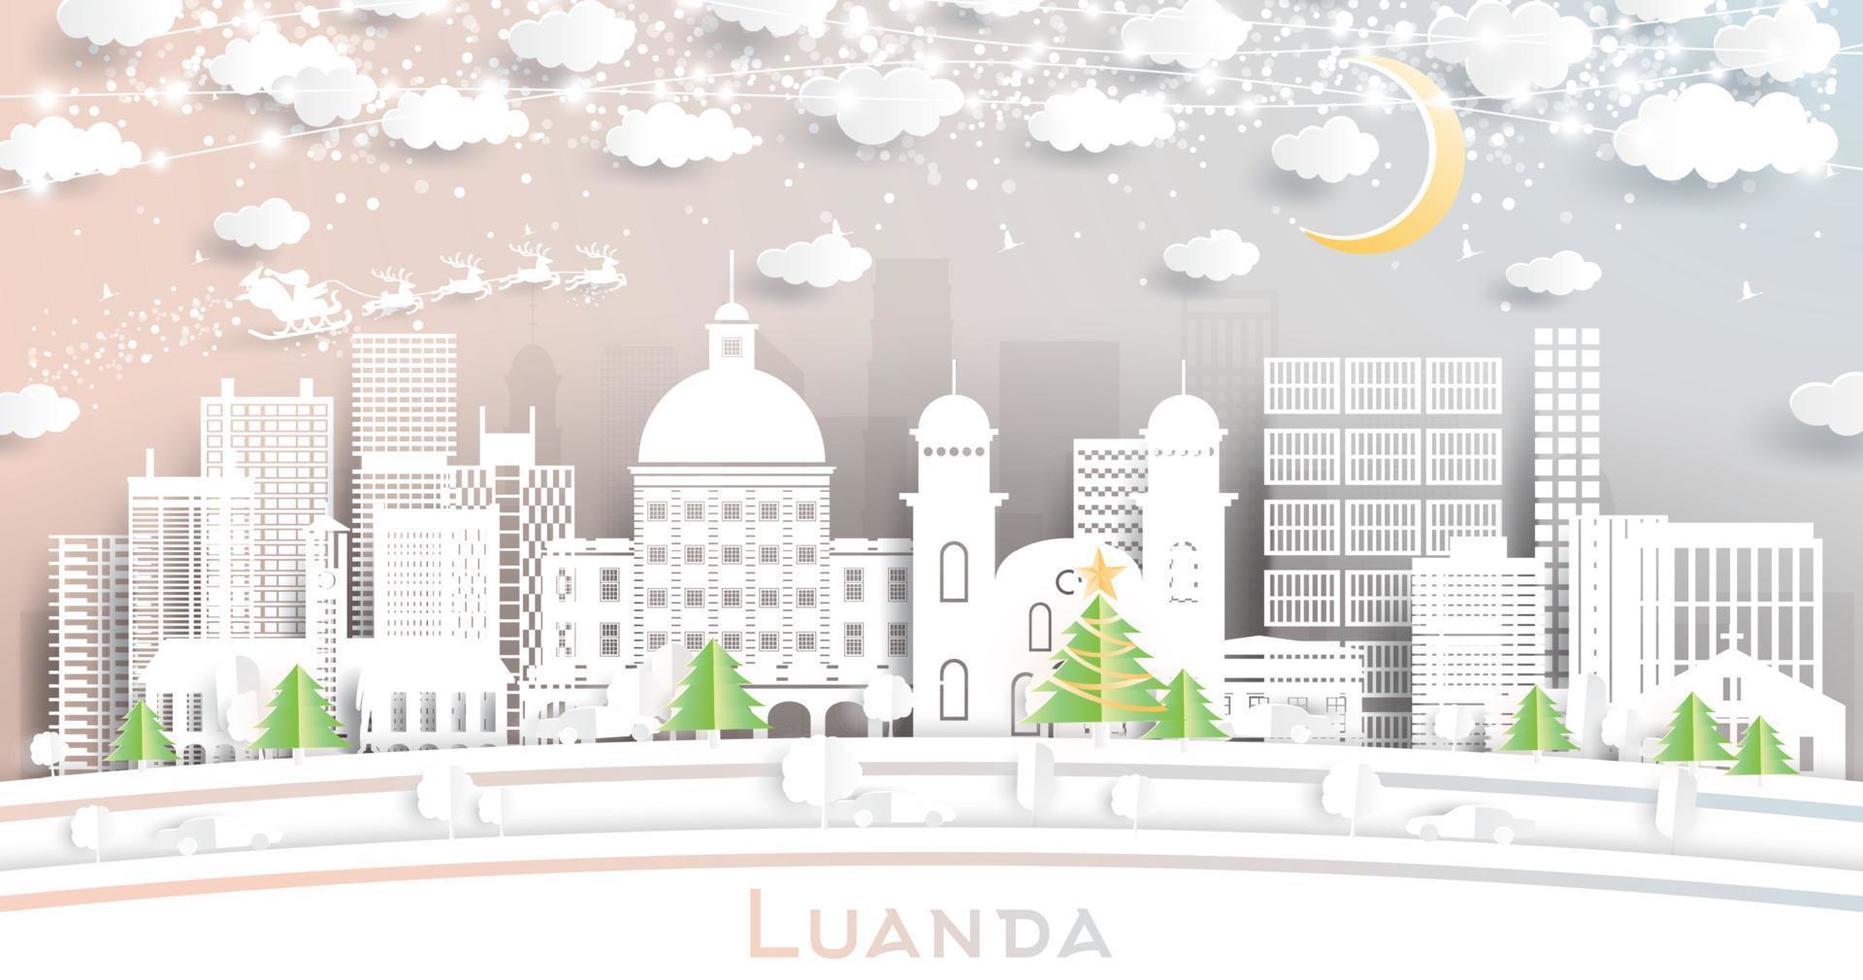 Luanda Angola City Skyline in Paper Cut Style with Snowflakes, Moon and Neon Garland. vector